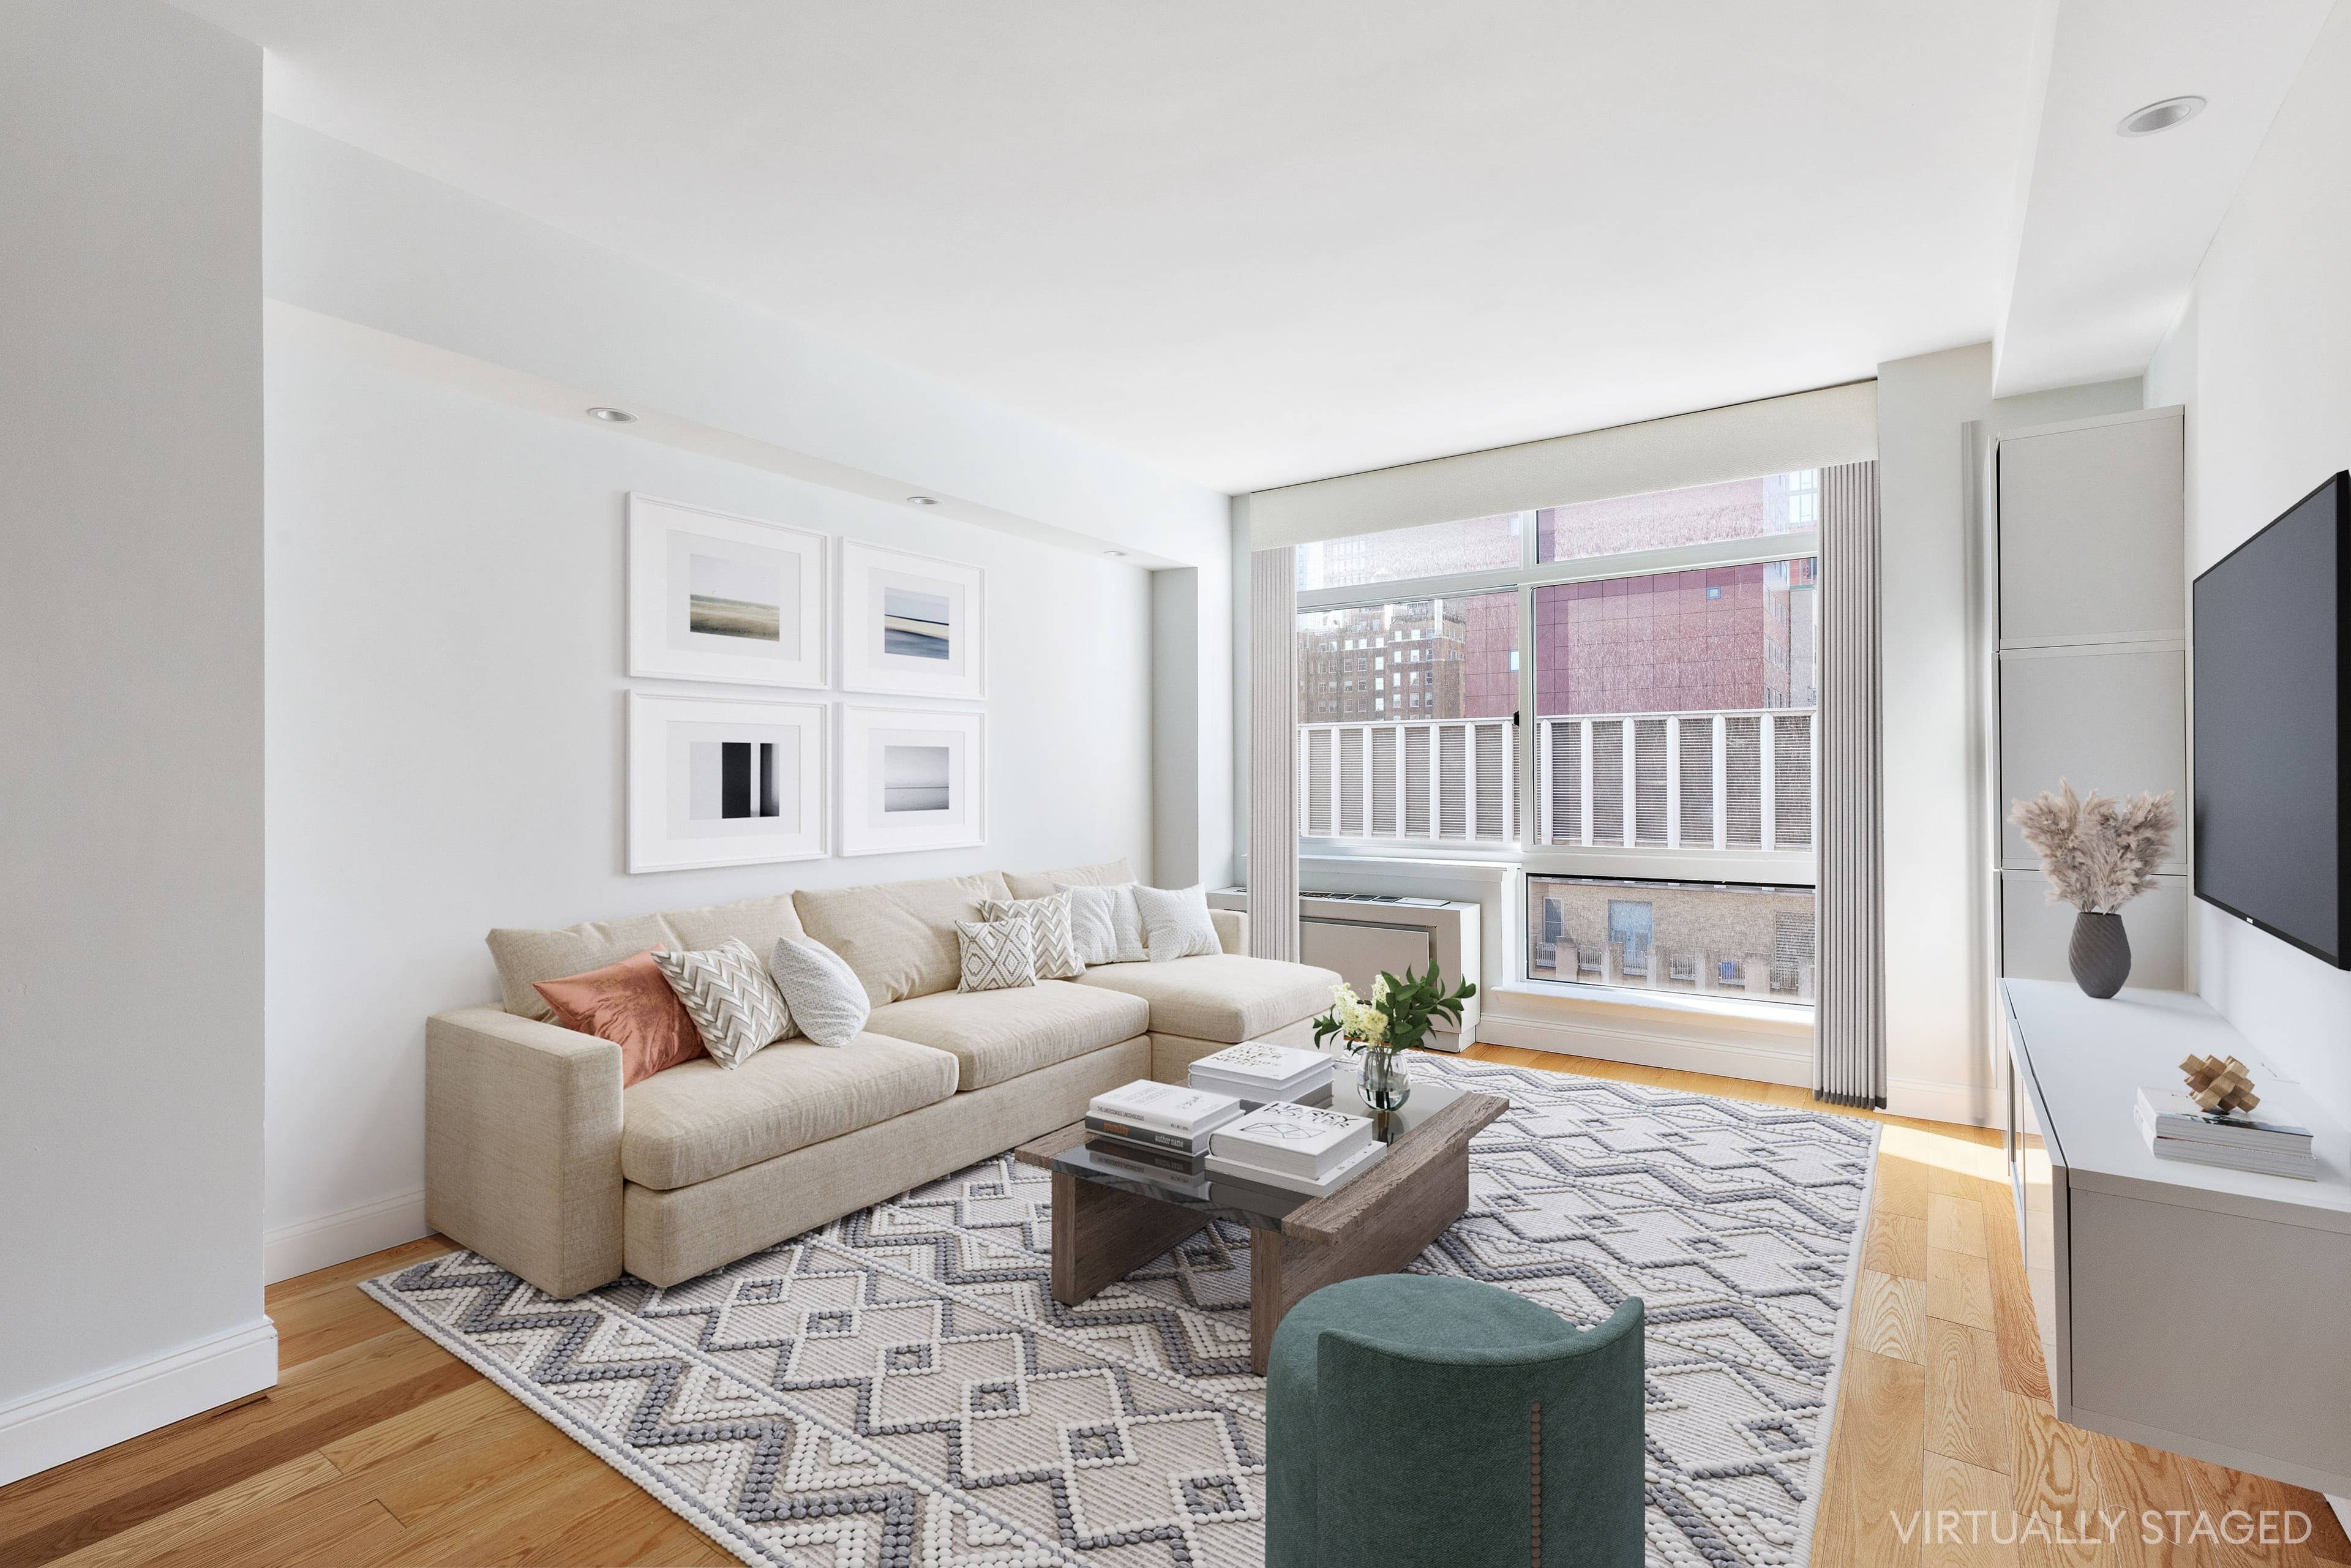 Welcome home to this high floor, newly renovated 2 bedroom, 1.